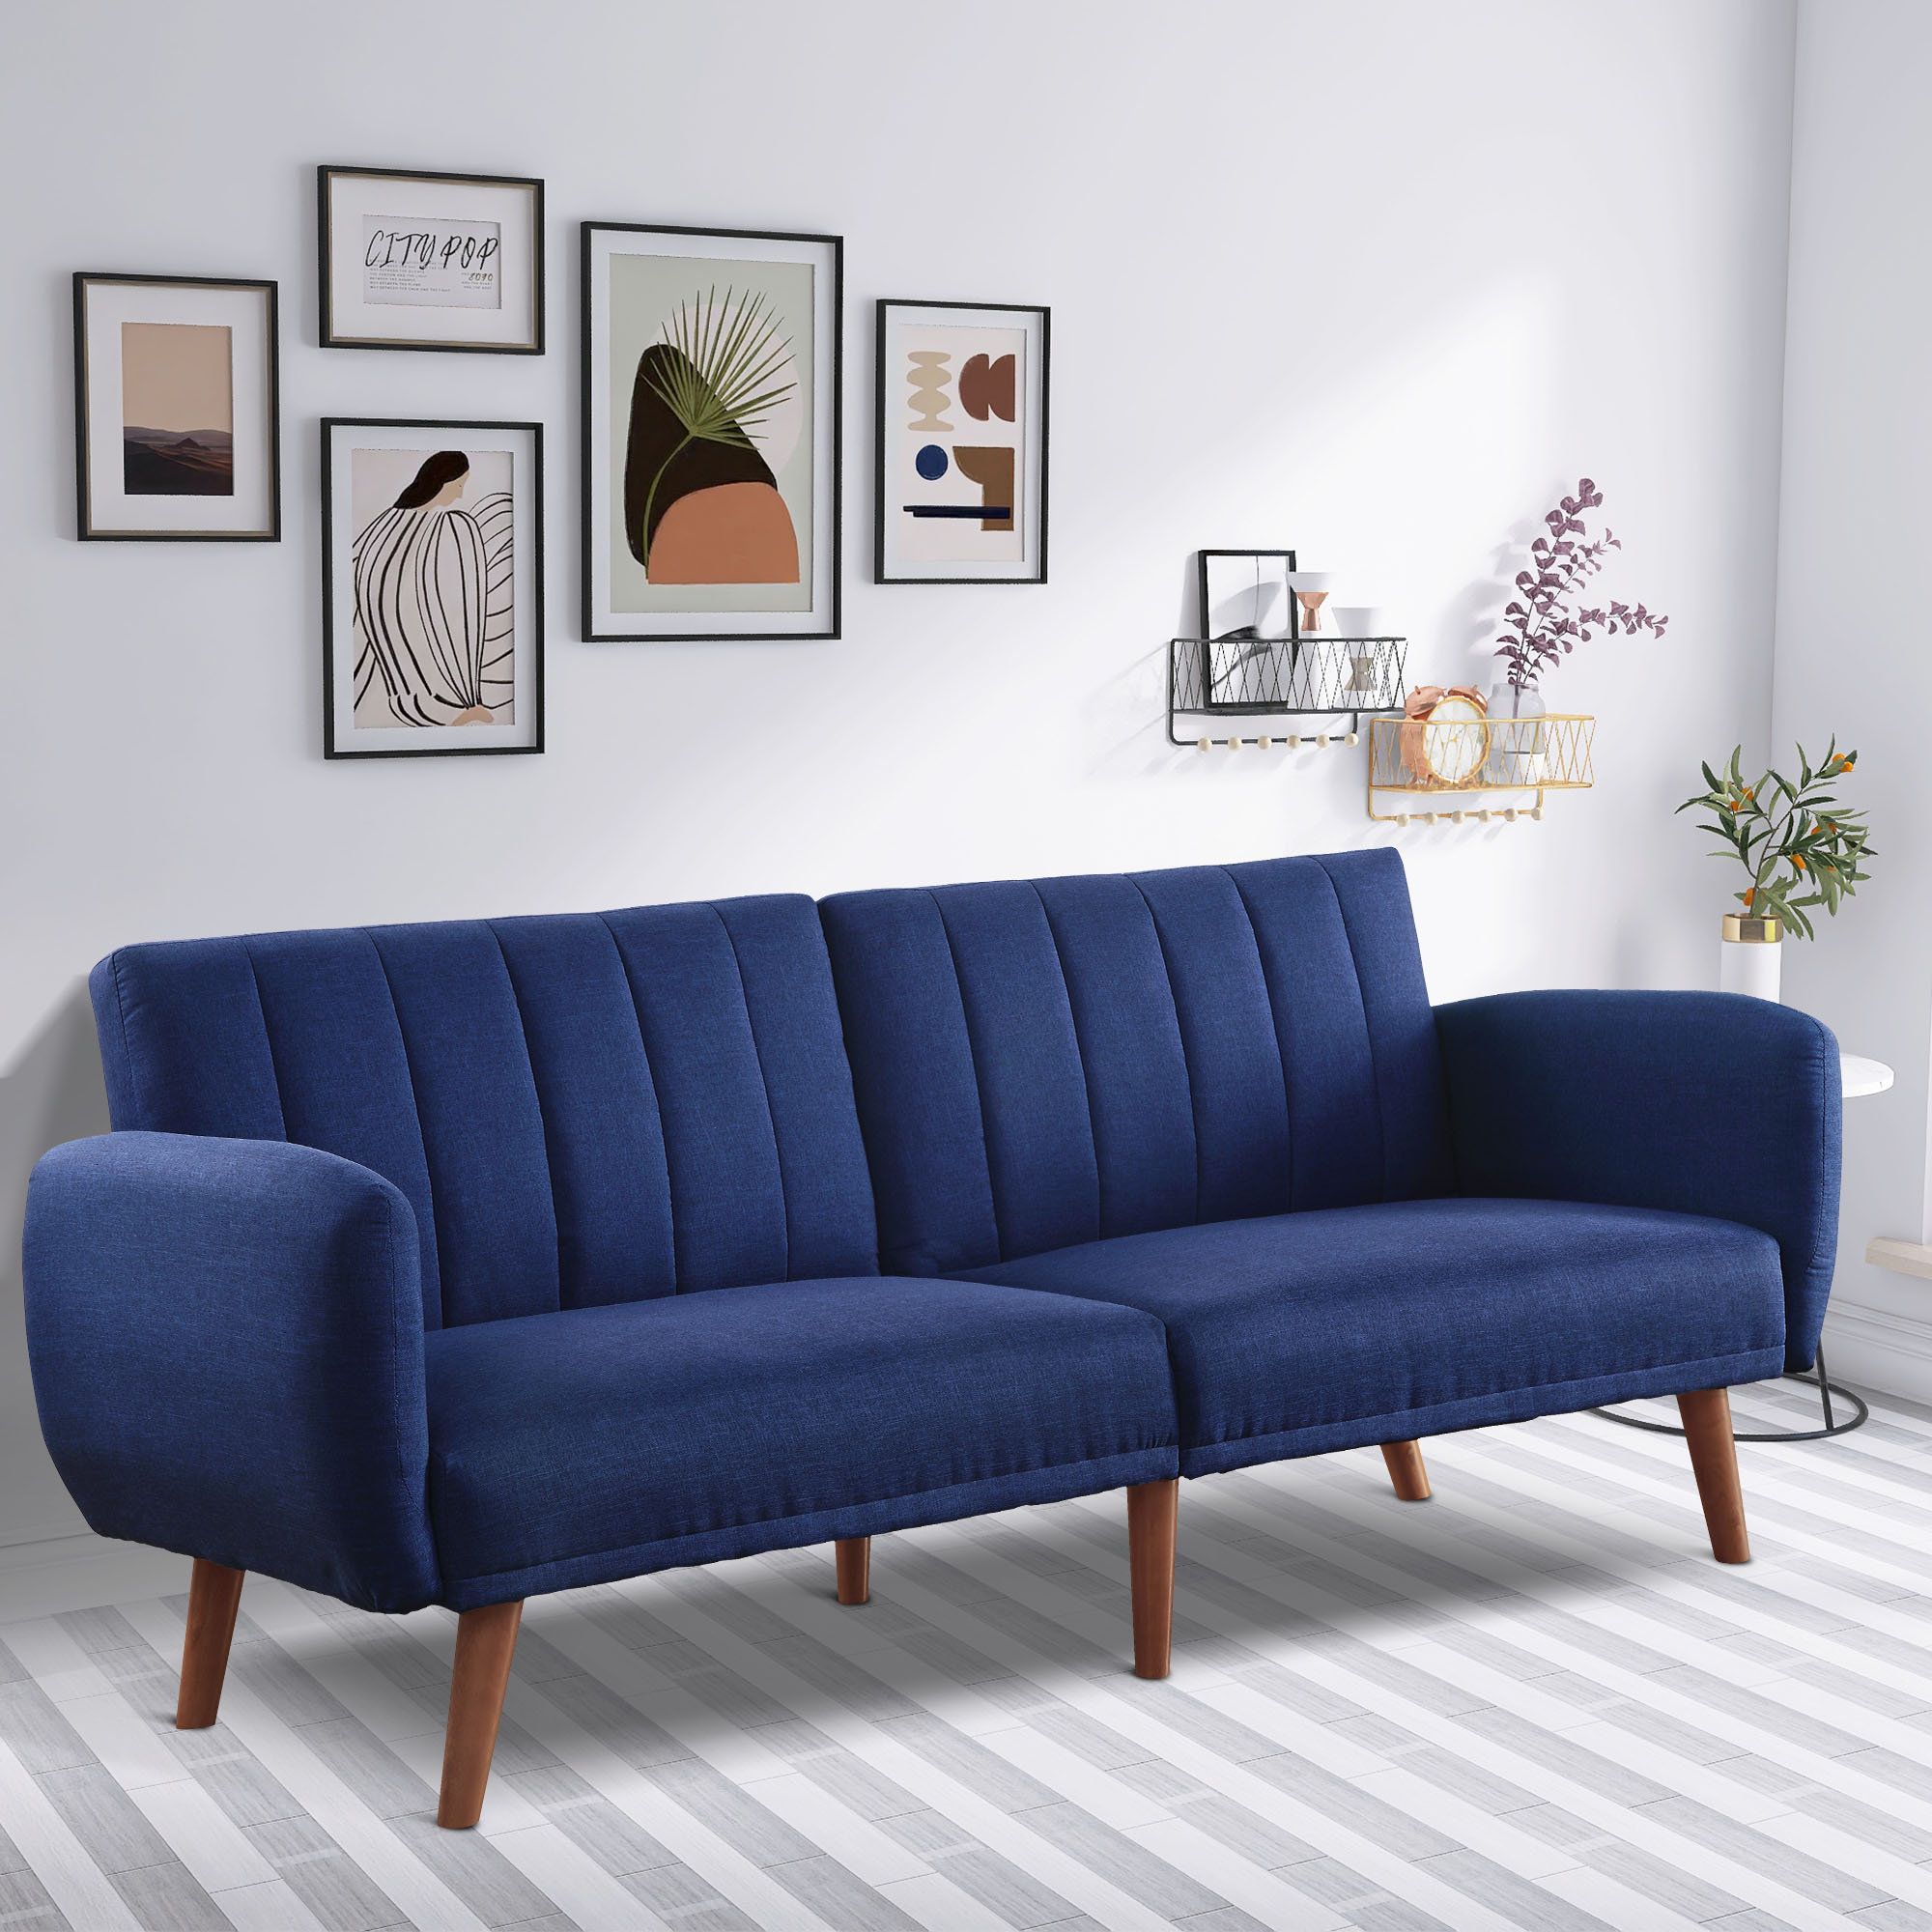 Wade Logan® Argene 76" Upholstered Tight Back Convertible Sofa | Wayfair In Navy Linen Coil Sofas (View 5 of 15)